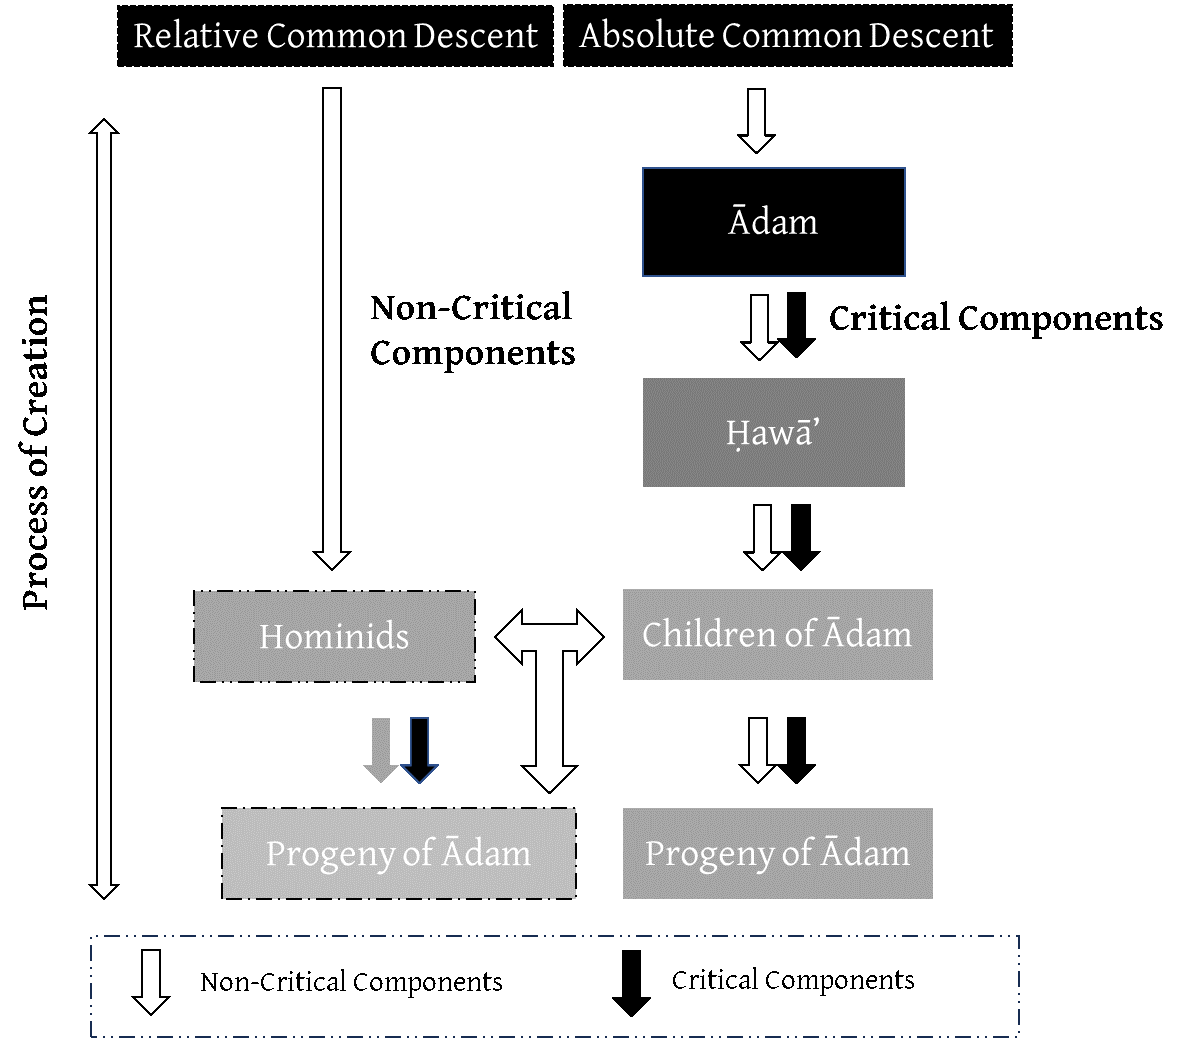 Descent of Critical and Non-Critical Components